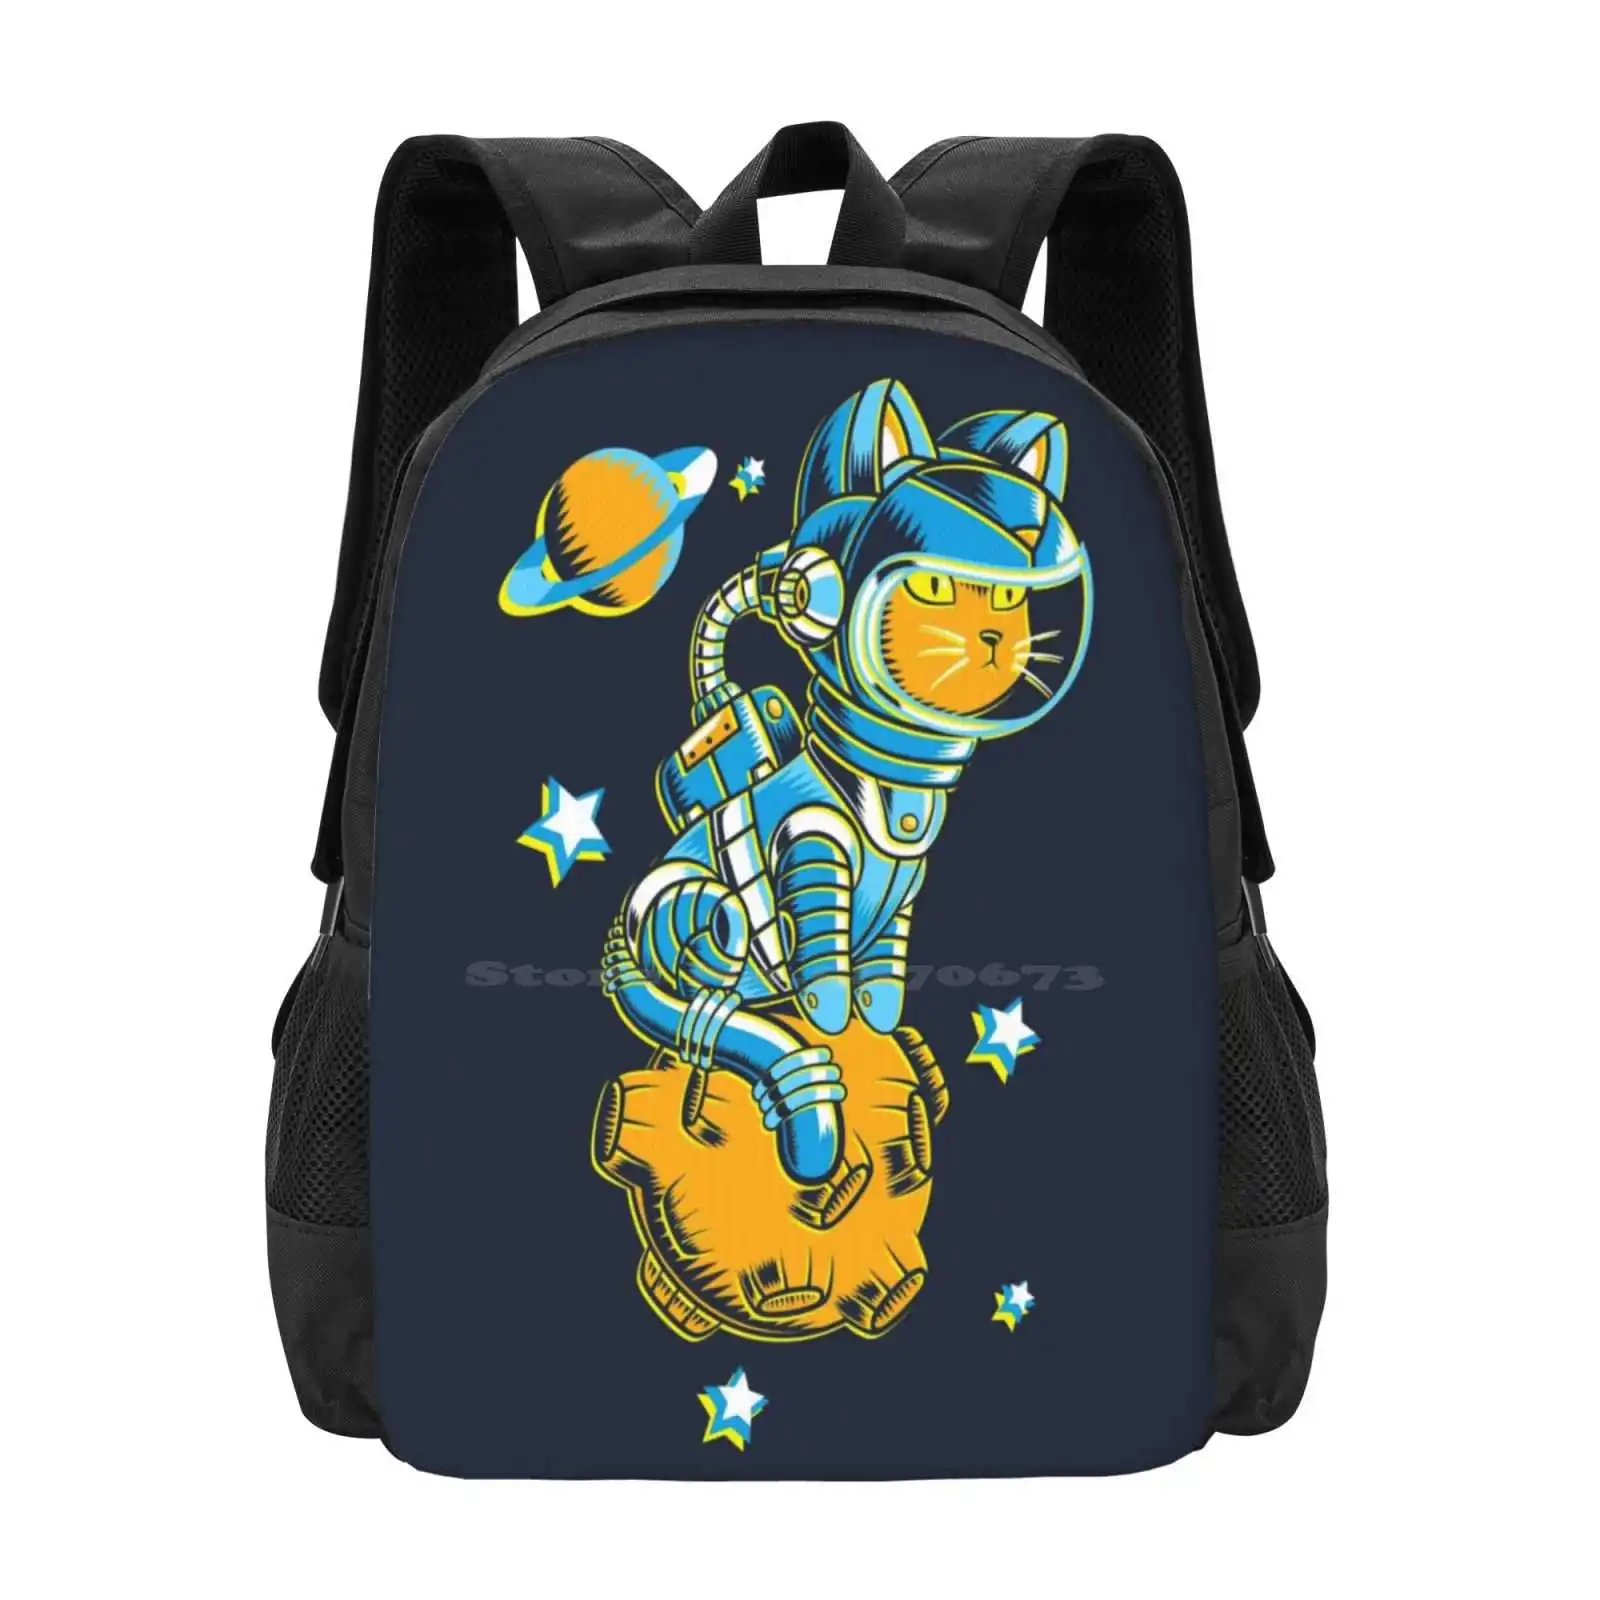 

Space Cat Hot Sale Backpack Fashion Bags Outer Space Cosmos Cosmic Universe Astronaut Planets Stars Cats Kitty Kitten Cute